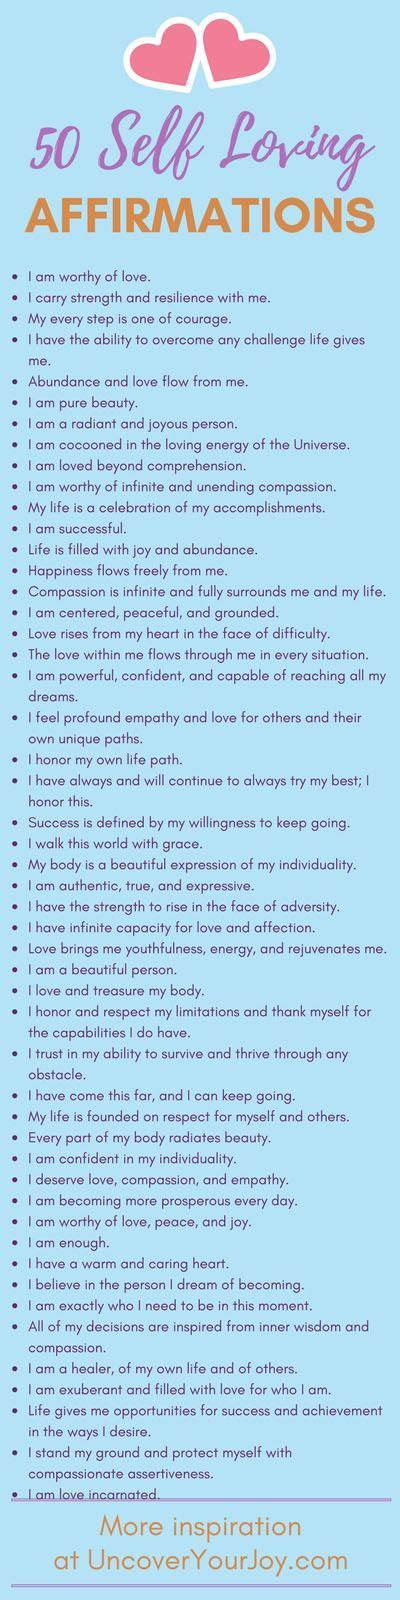 50 Affirmations For Self Love Inspiring Resources Quotes And More